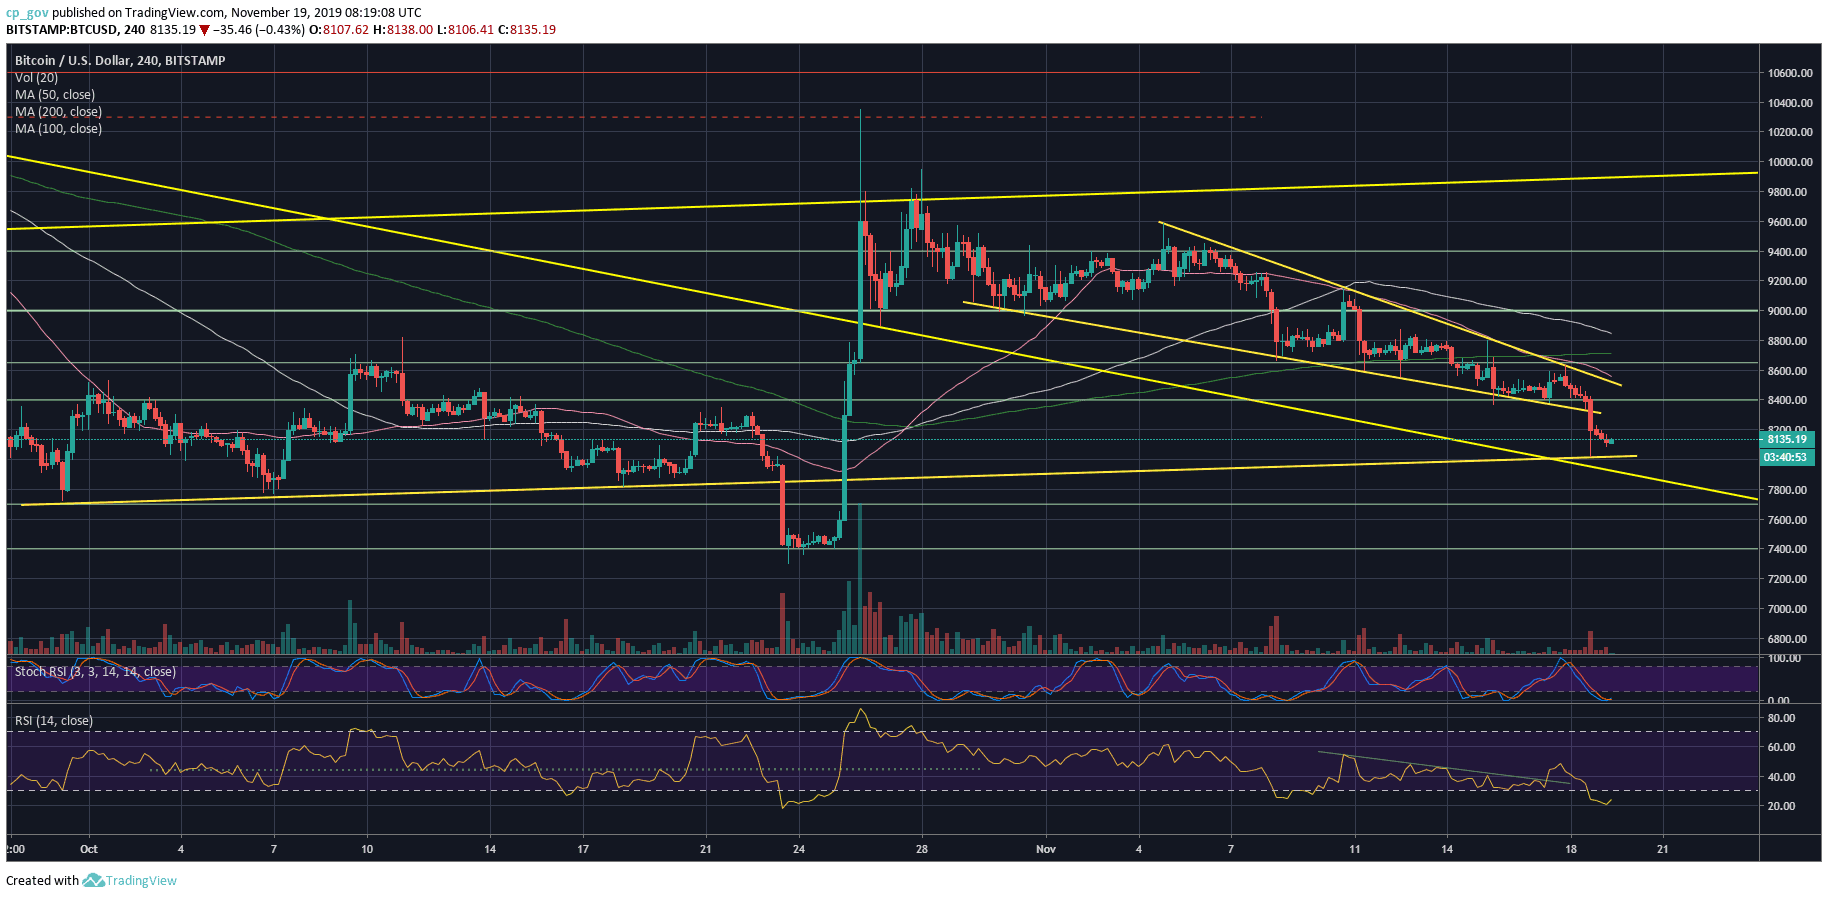 Bitcoin Price Analysis: BTC Breaks Down The Wedge. Now, Will $8000 Hold?